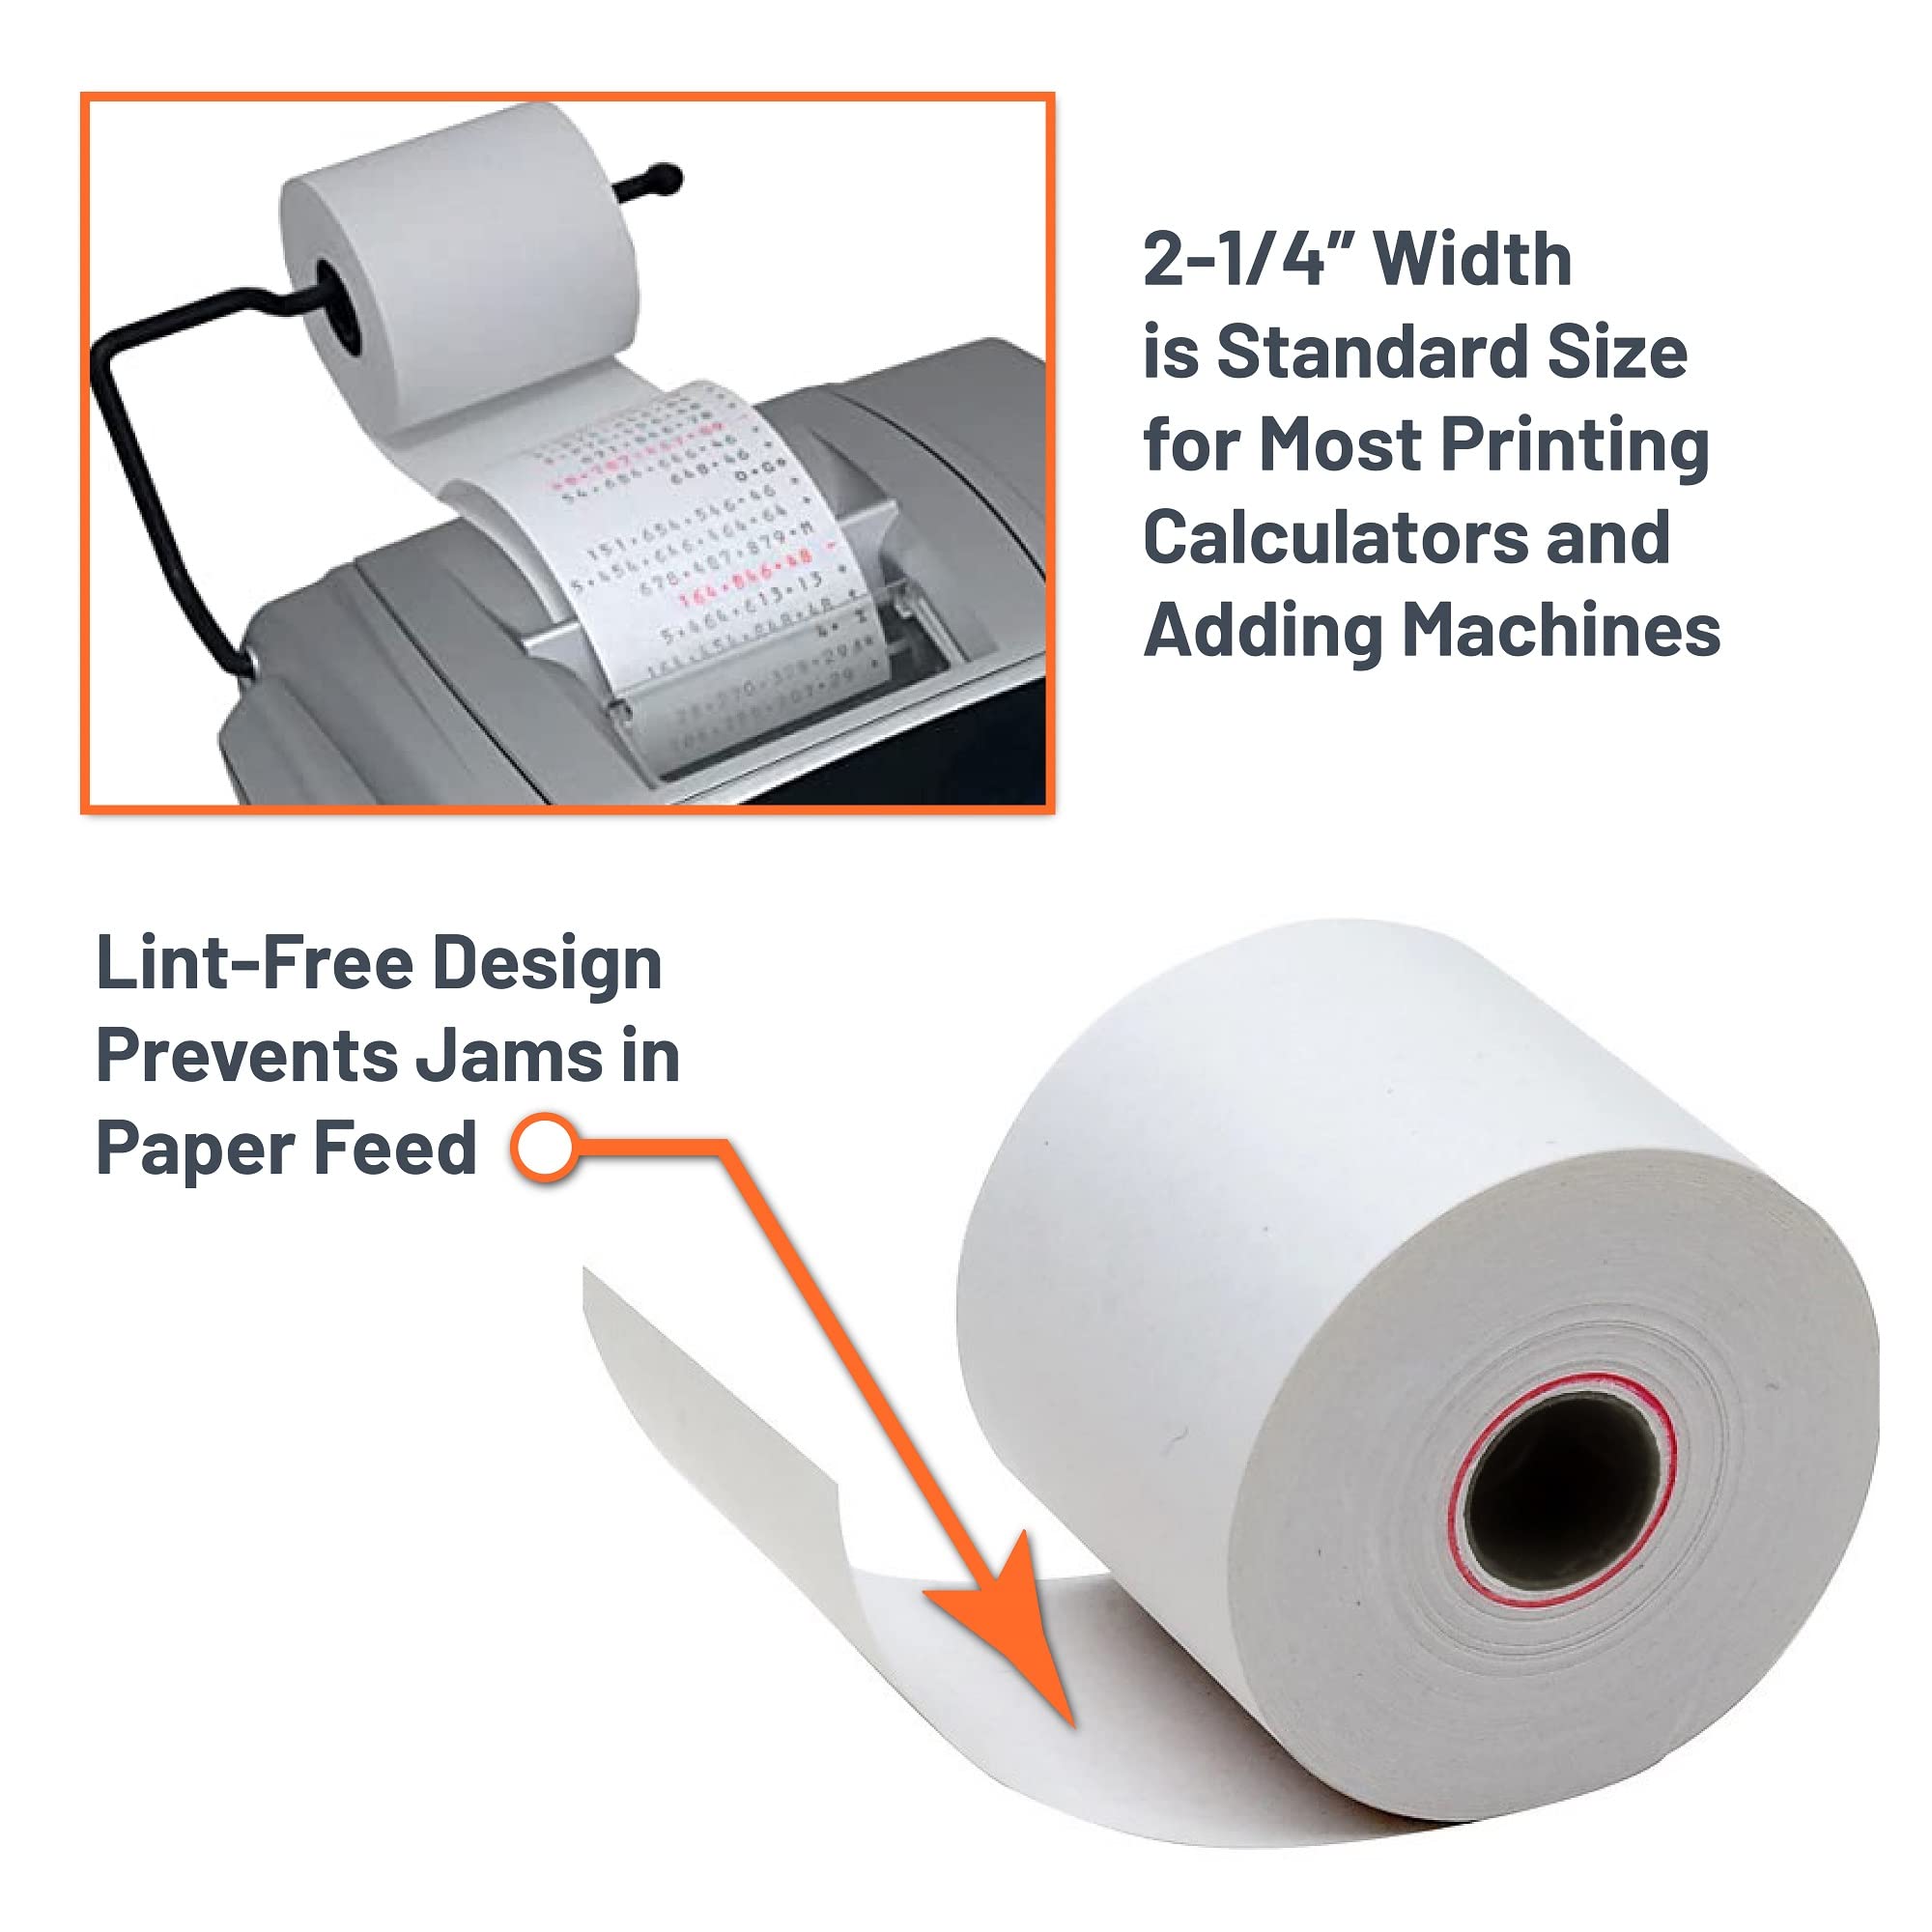 Victor 7050 Compact White Paper Rolls for Handheld and Portable Printing Calculators/Adding Machines 2.25” W x 150' FT (3-Pack)